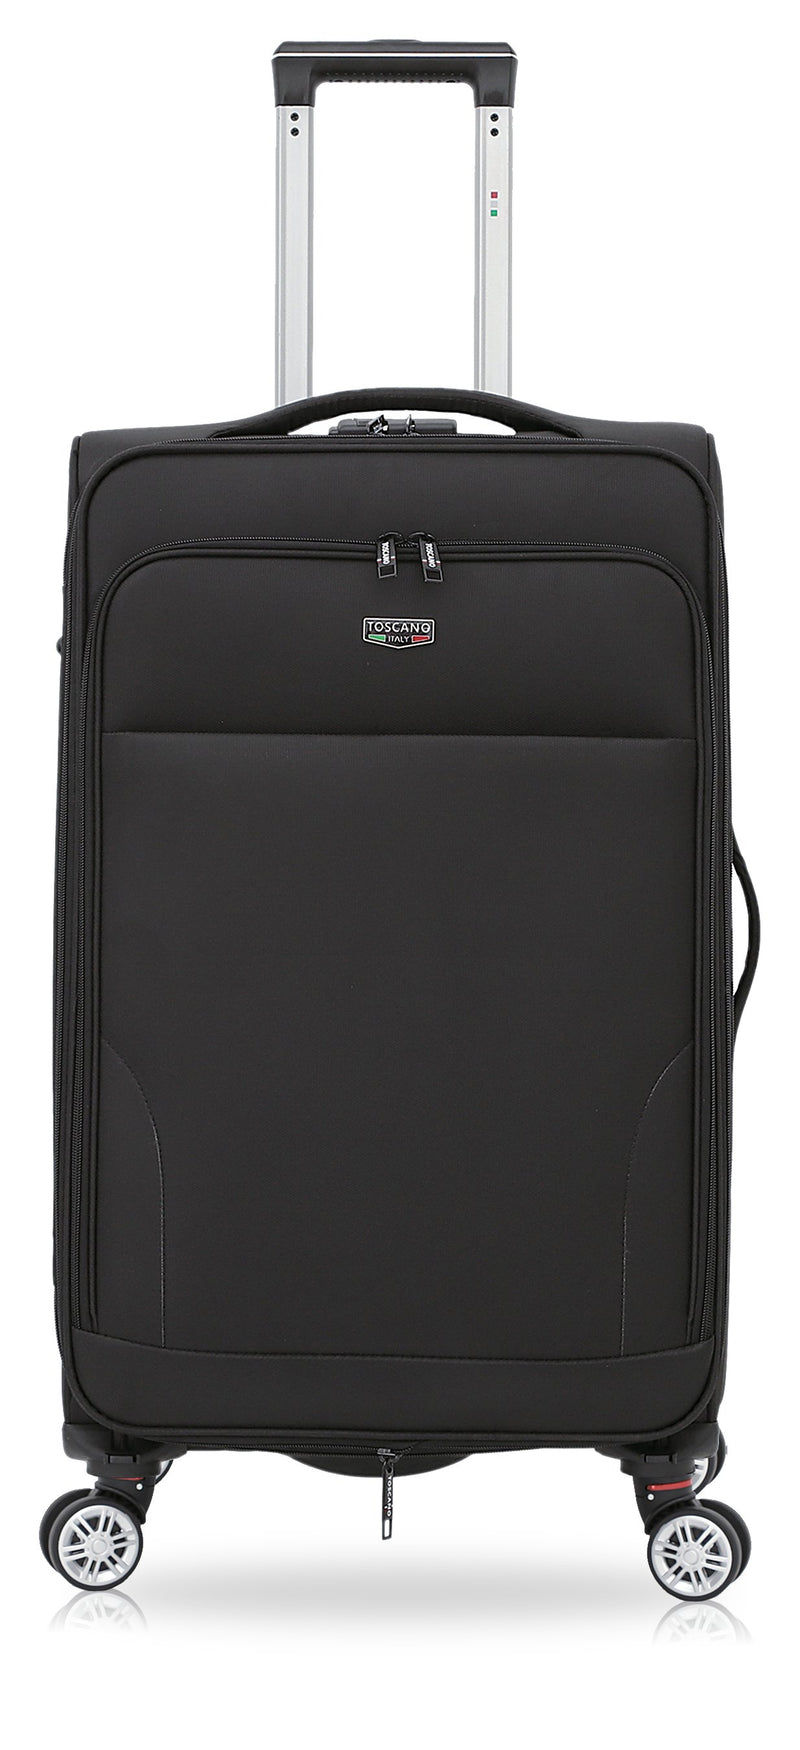 TOSCANO by Tucci 23-inch Ricerca Lightweight Carry On  Luggage Suitcase